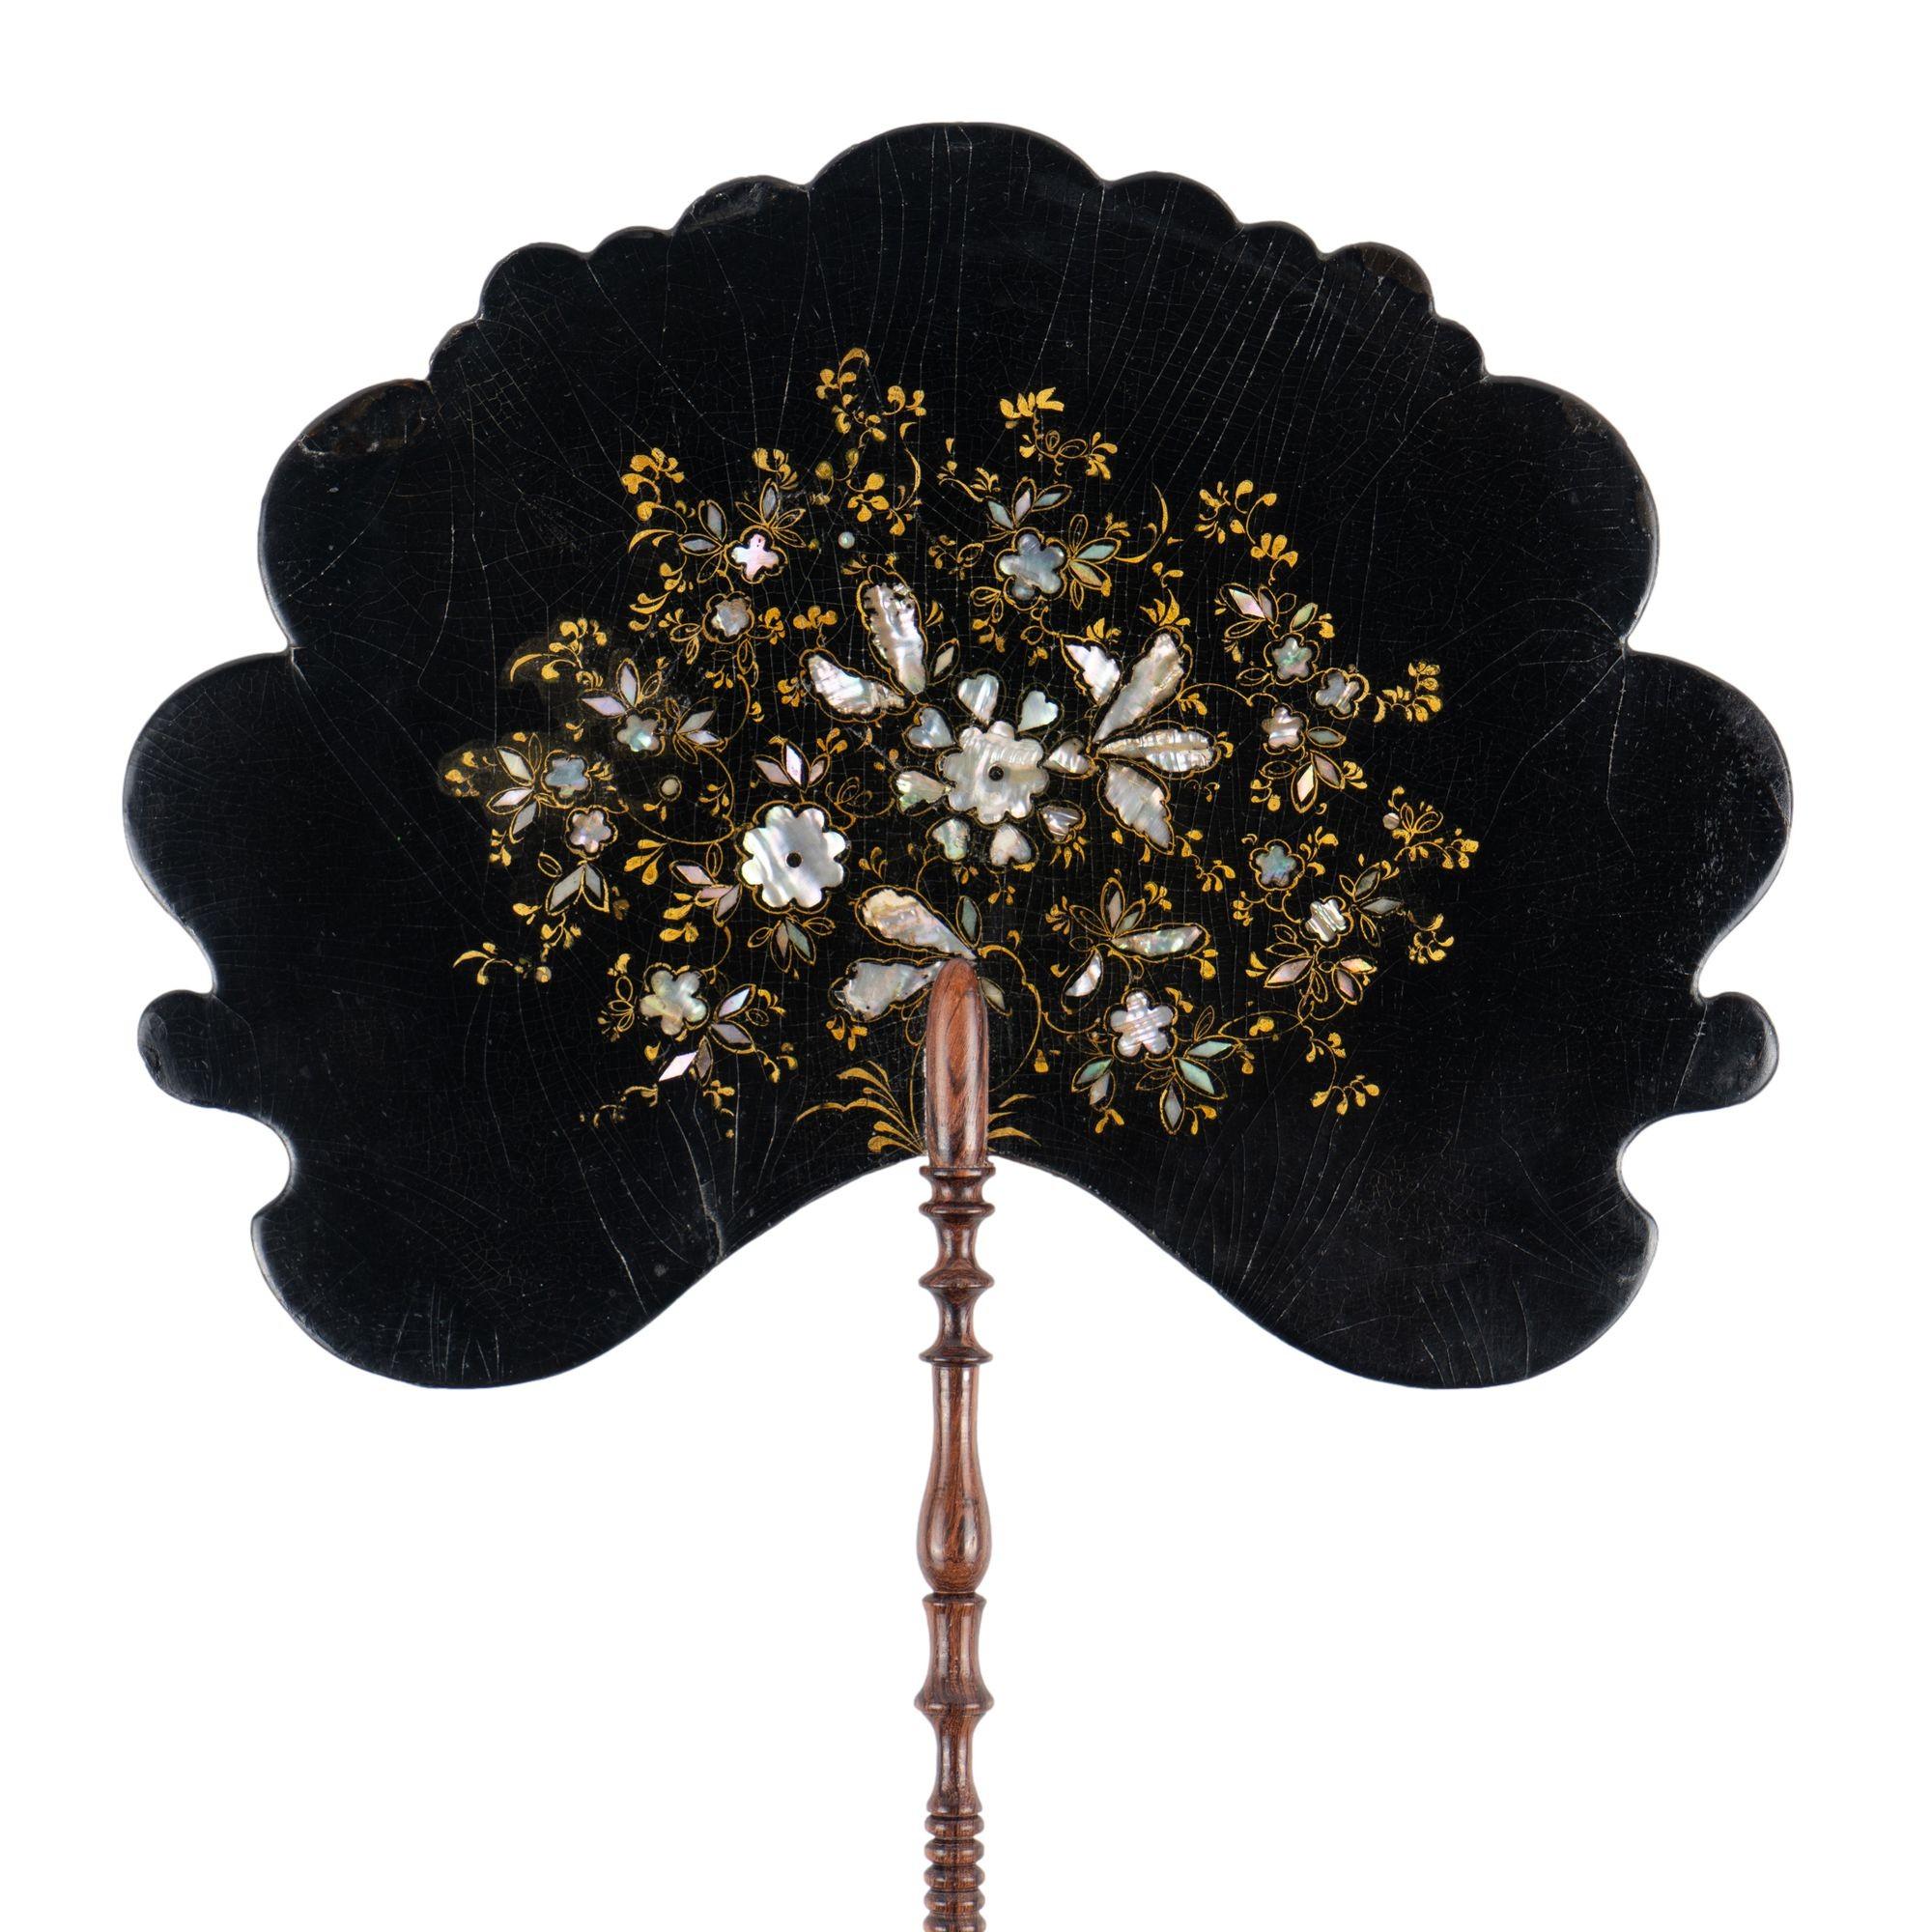 Black paper mache face screen with inlaid abalone and highlighted in gilt with an overall floral spray. These screens were used by women to shield their face from the heat as they sat close to the fire in colder months. The fan is mounted on a